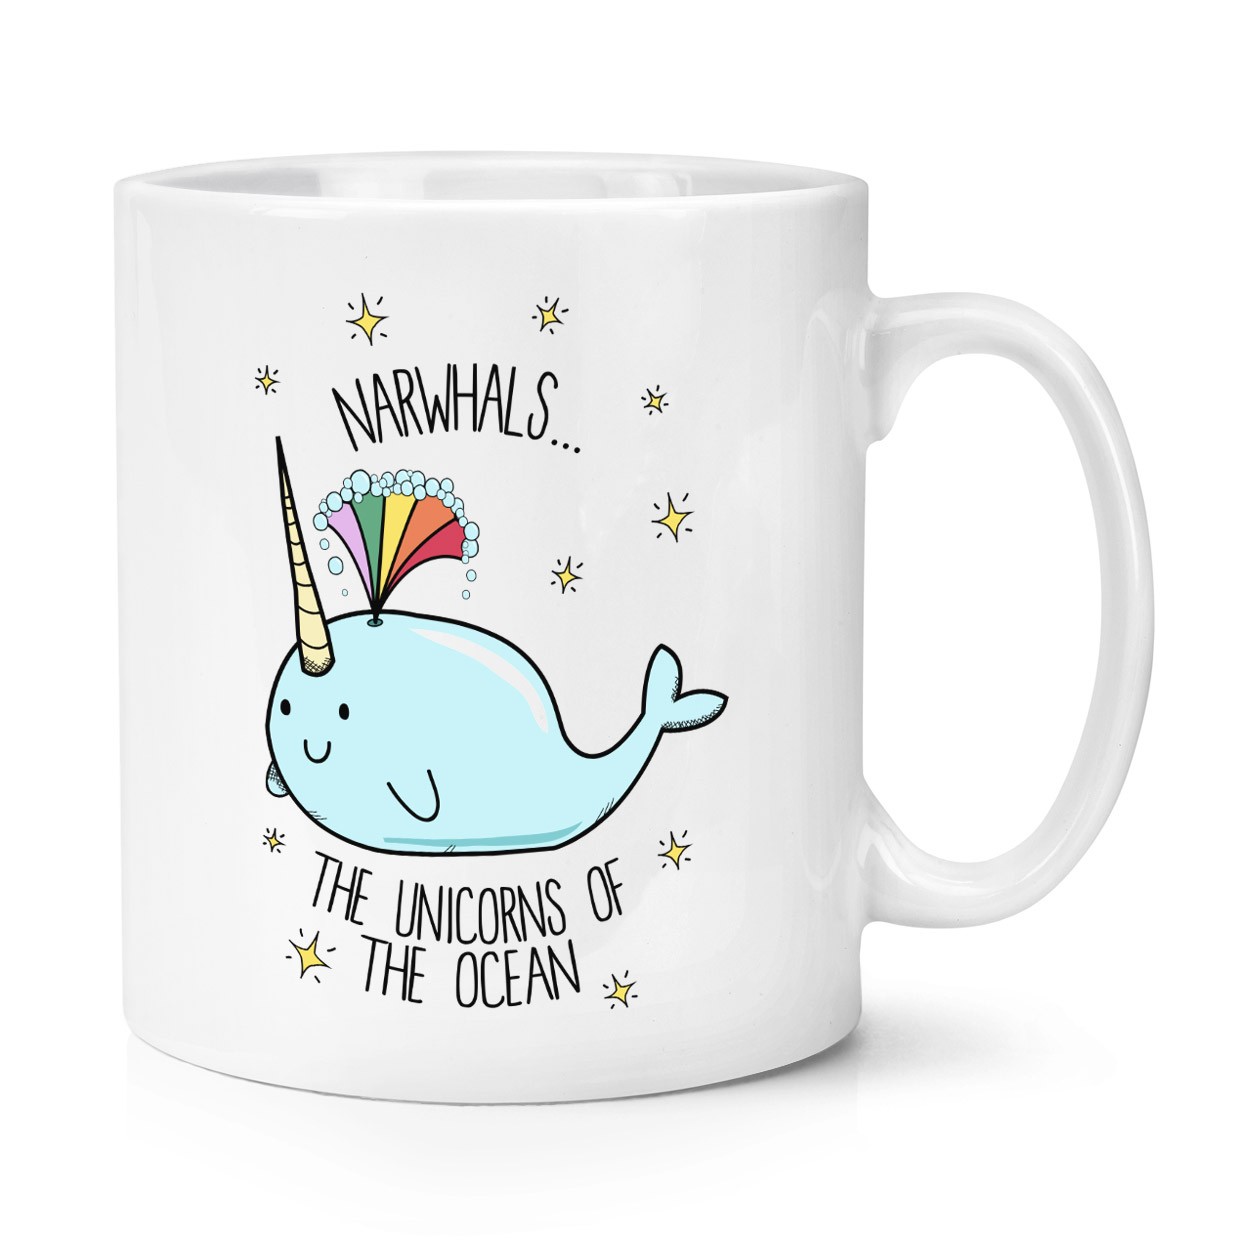 Narwhals The Unicorns Of The Ocean 10oz Mug Cup